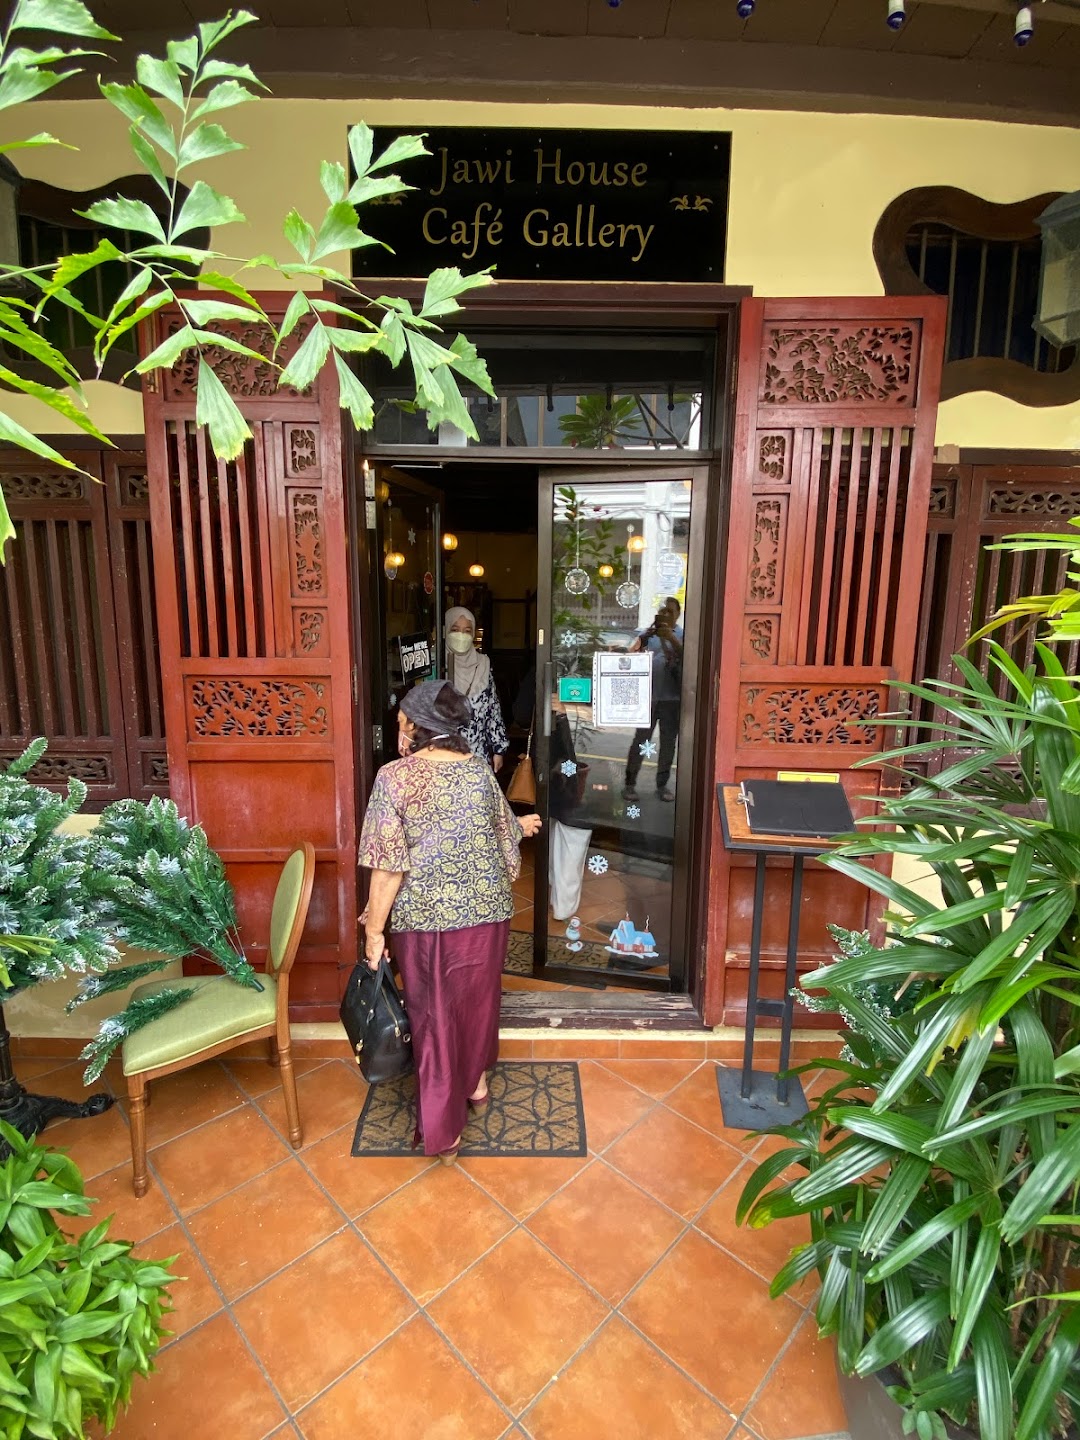 Jawi House Cafe Gallery